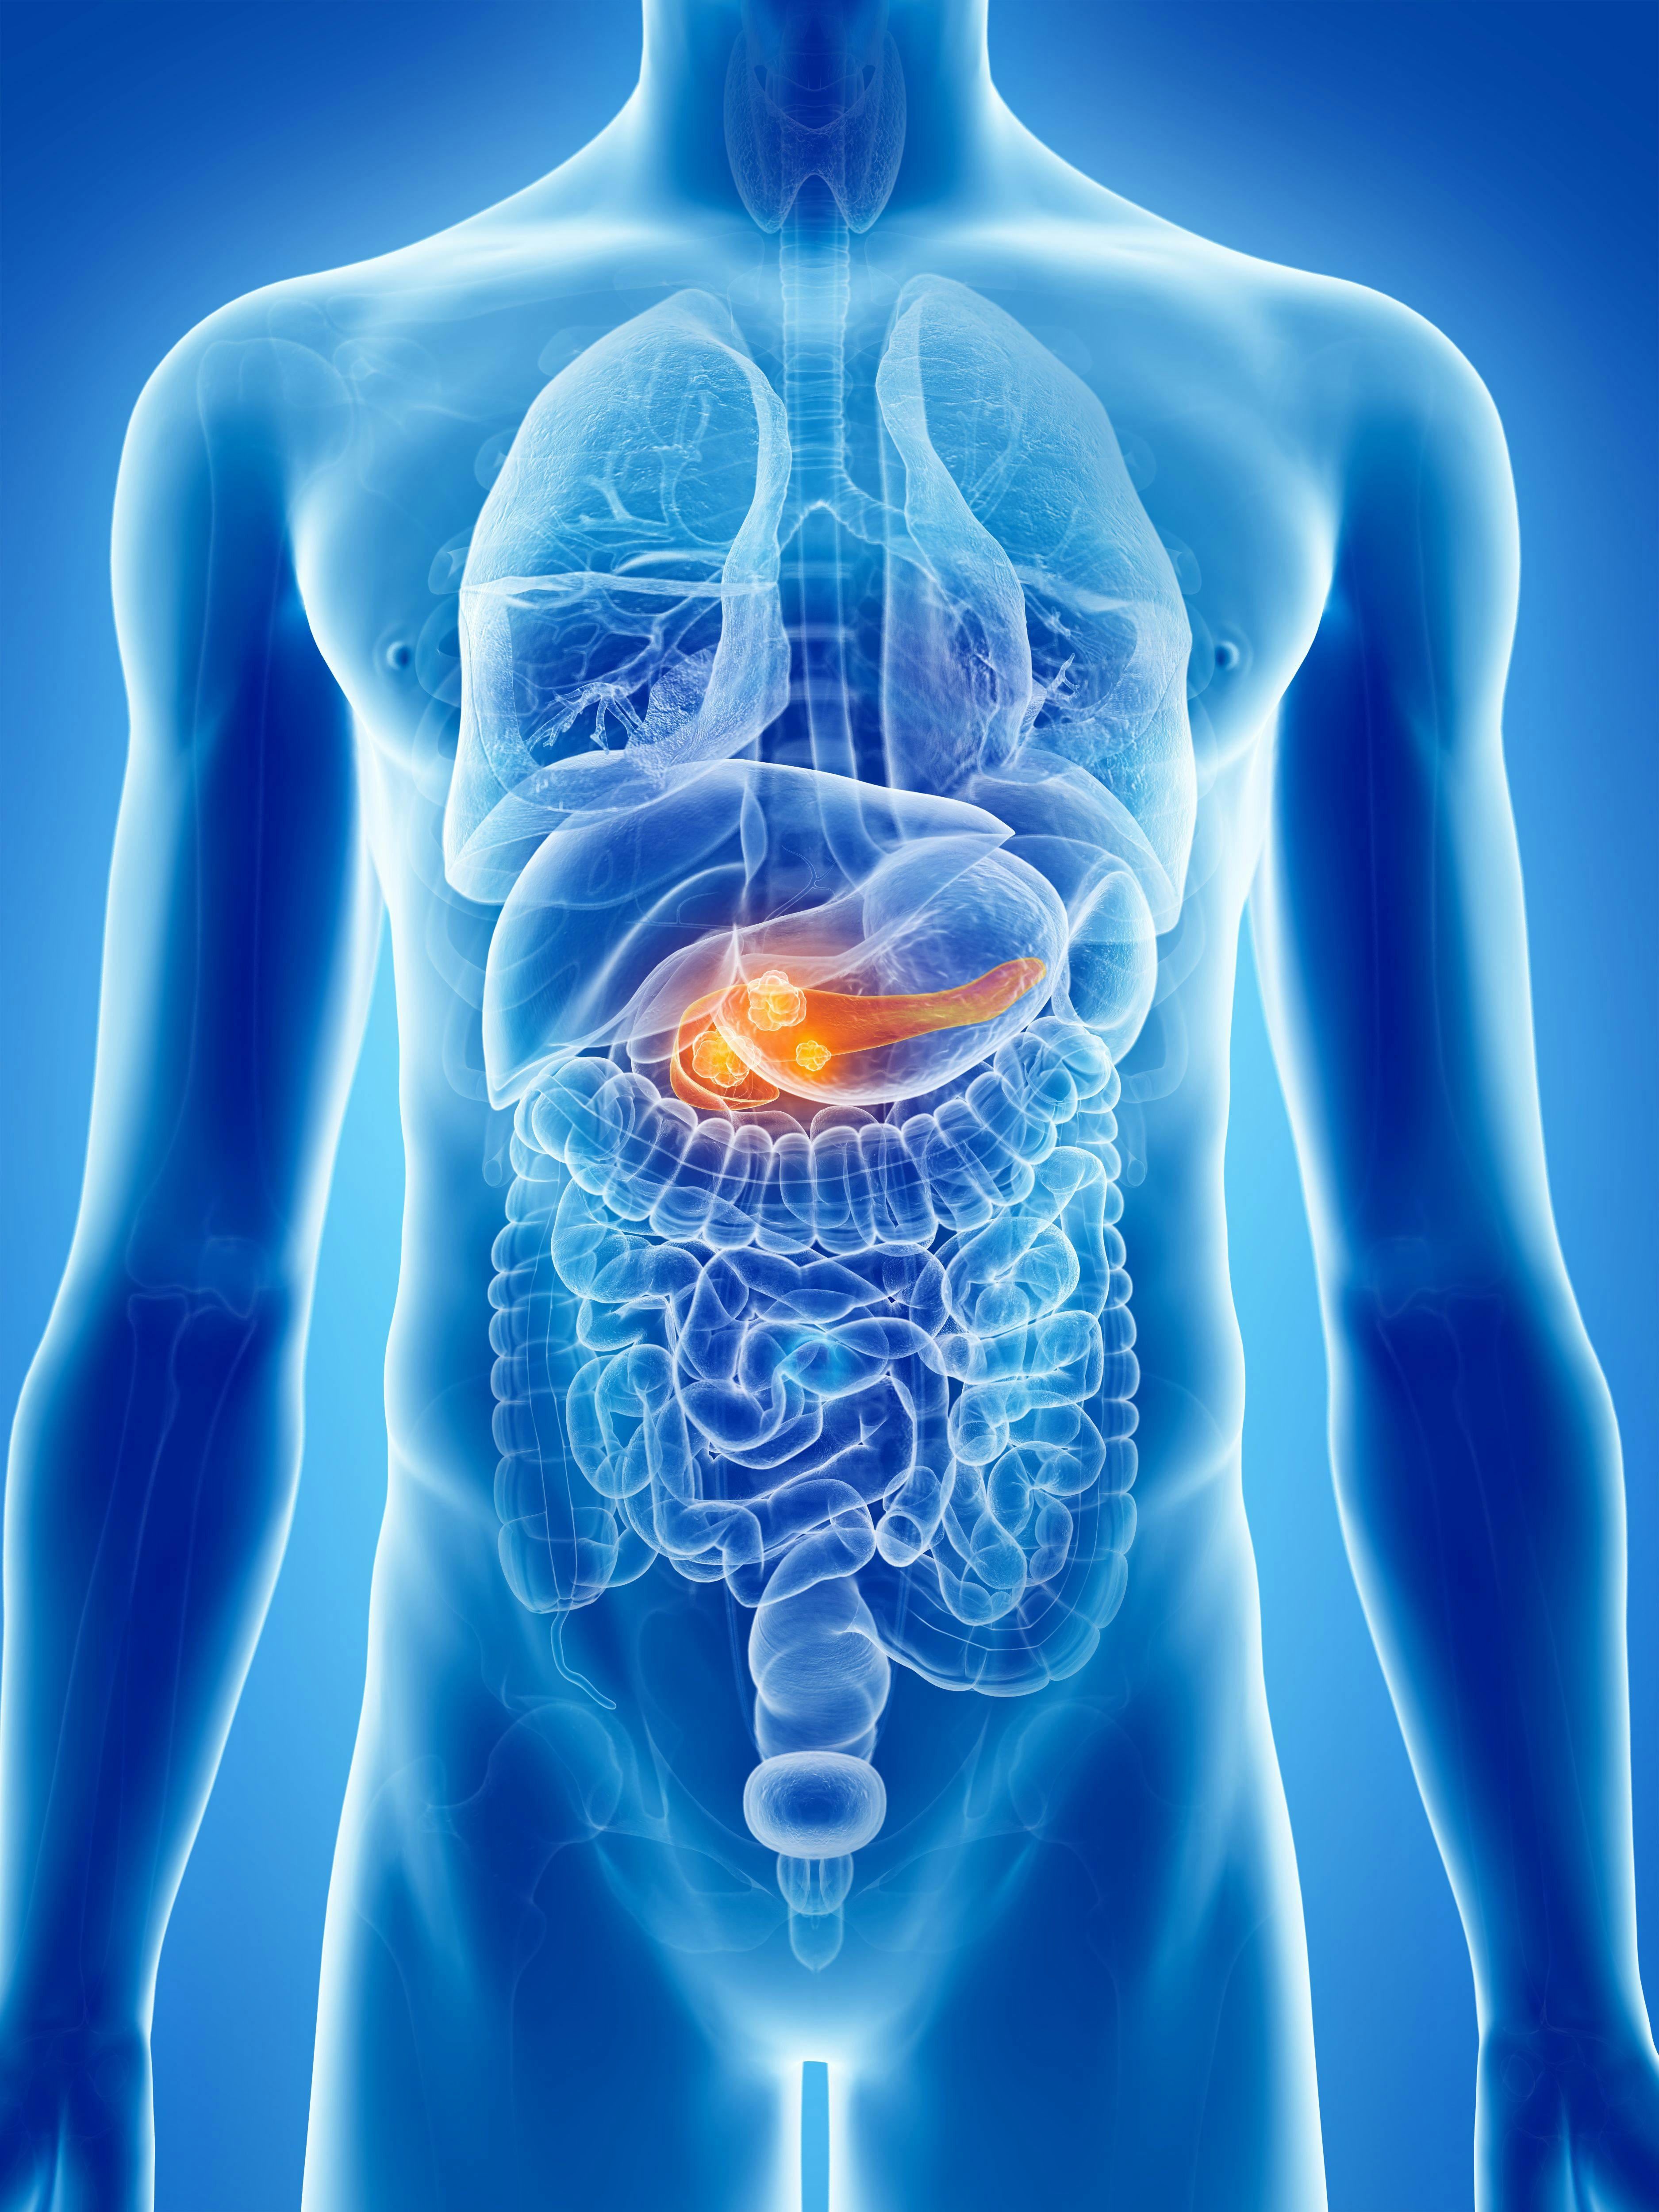 Phase 1 Trial Begins for New Treatment Delivery Strategy in Pancreatic Cancer